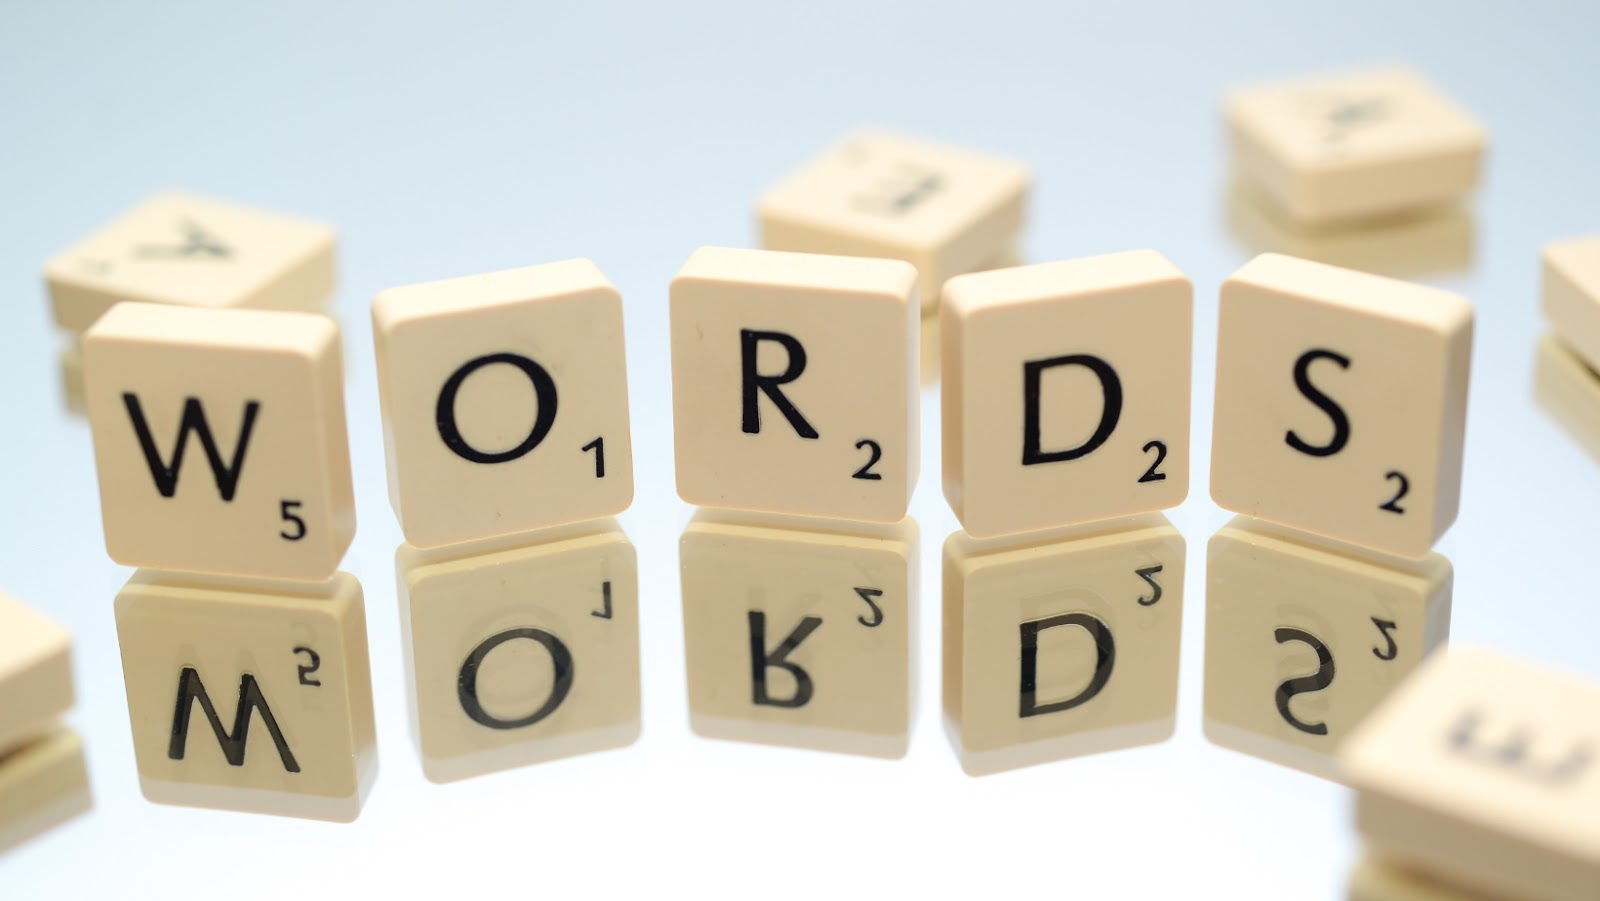 5 letter word ending in a